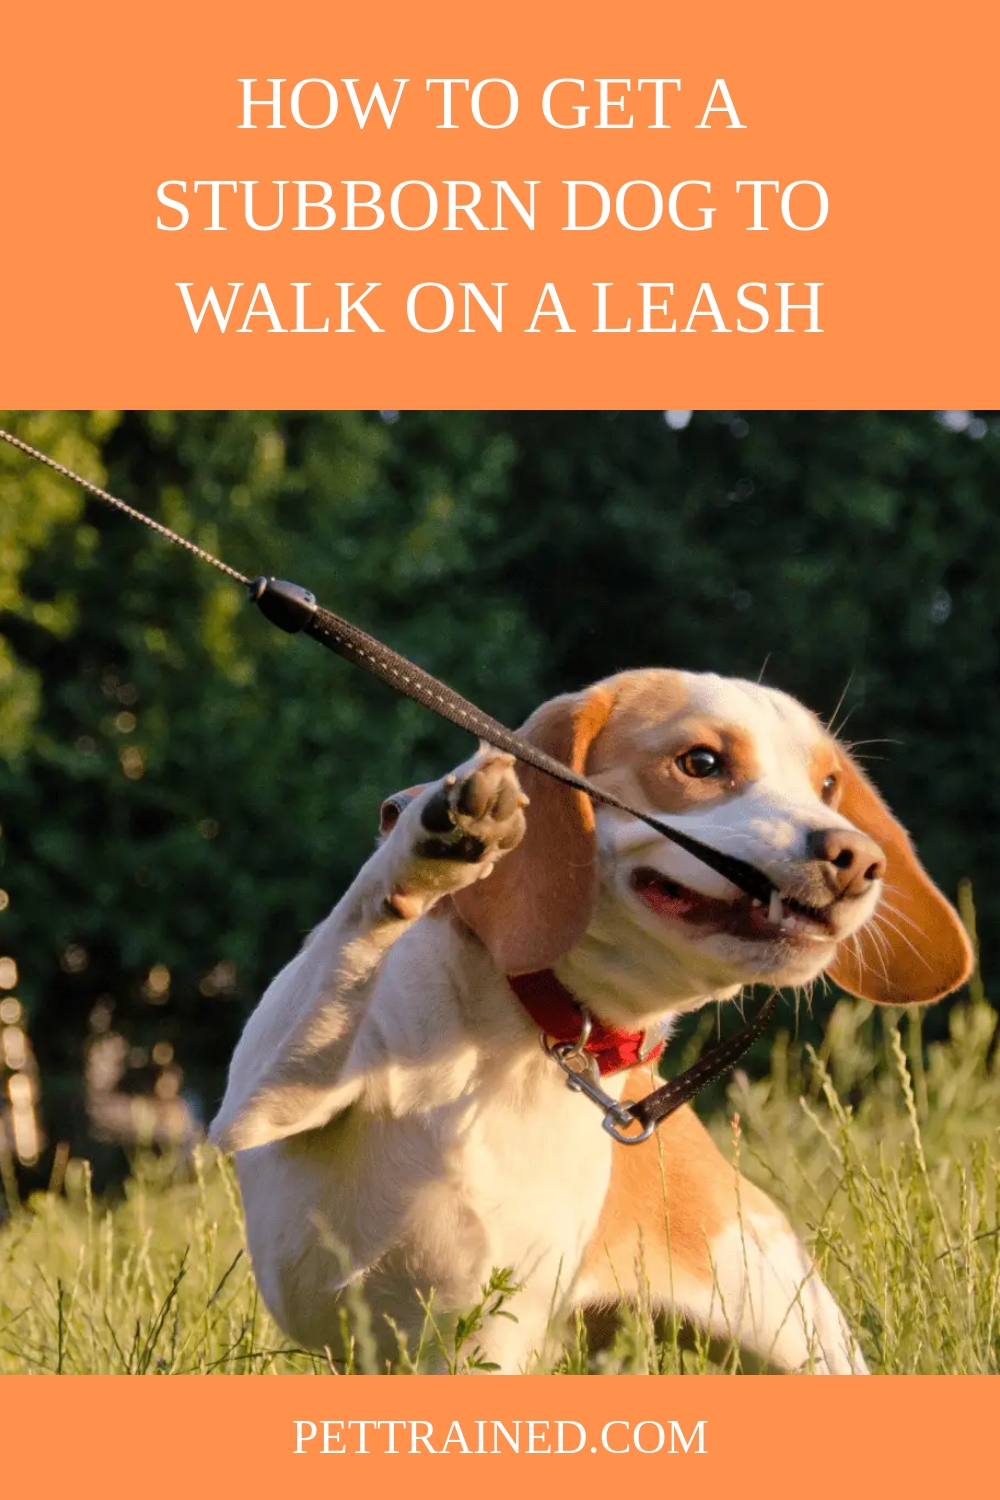 How To Get A Stubborn Dog To Walk On A Leash - Pet Trained